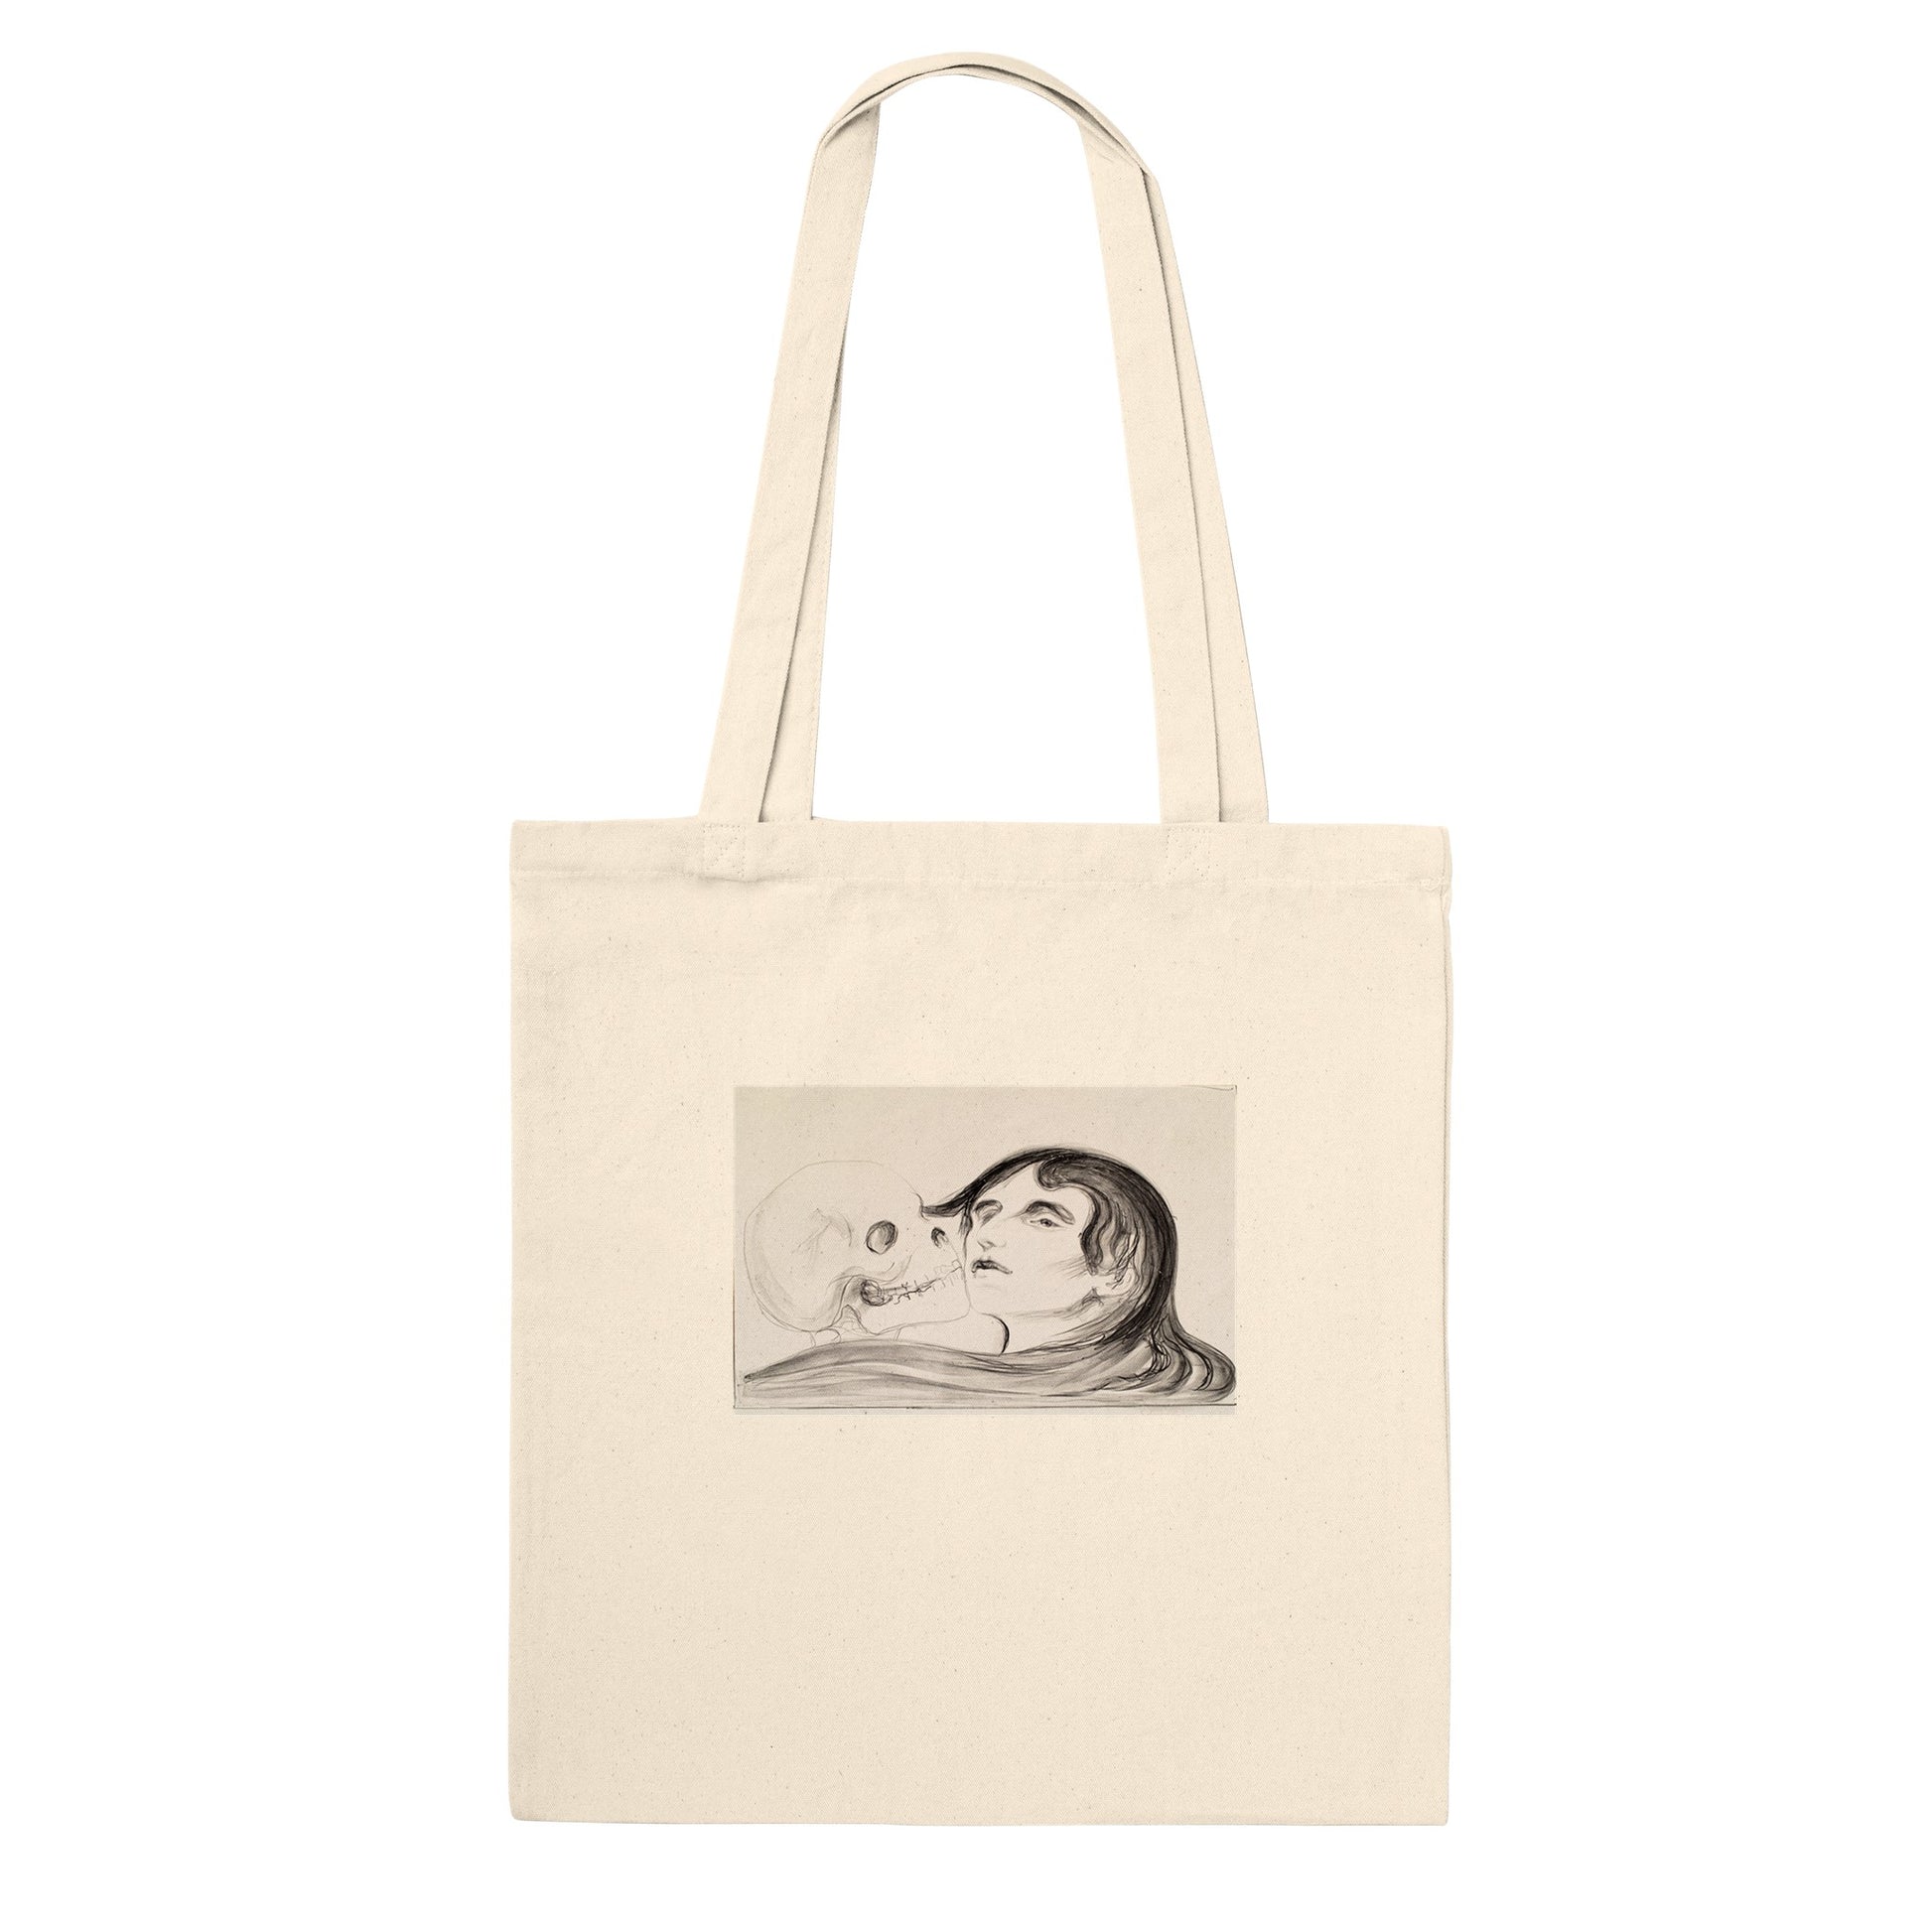 EDVARD MUNCH - THE KISS OF DEATH - CLASSIC TOTE BAG